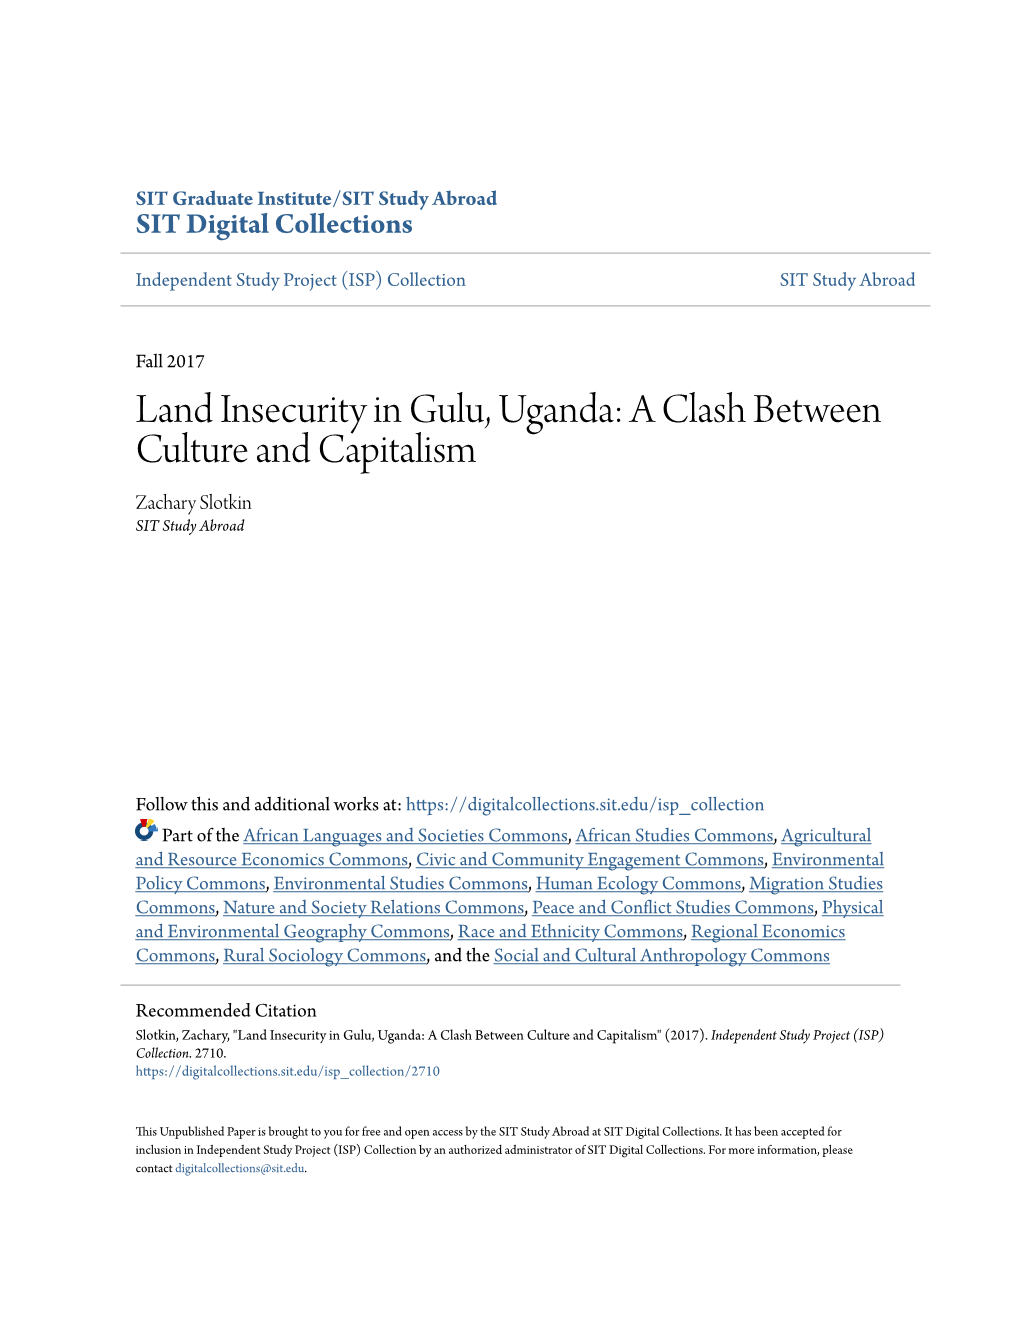 Land Insecurity in Gulu, Uganda: a Clash Between Culture and Capitalism Zachary Slotkin SIT Study Abroad